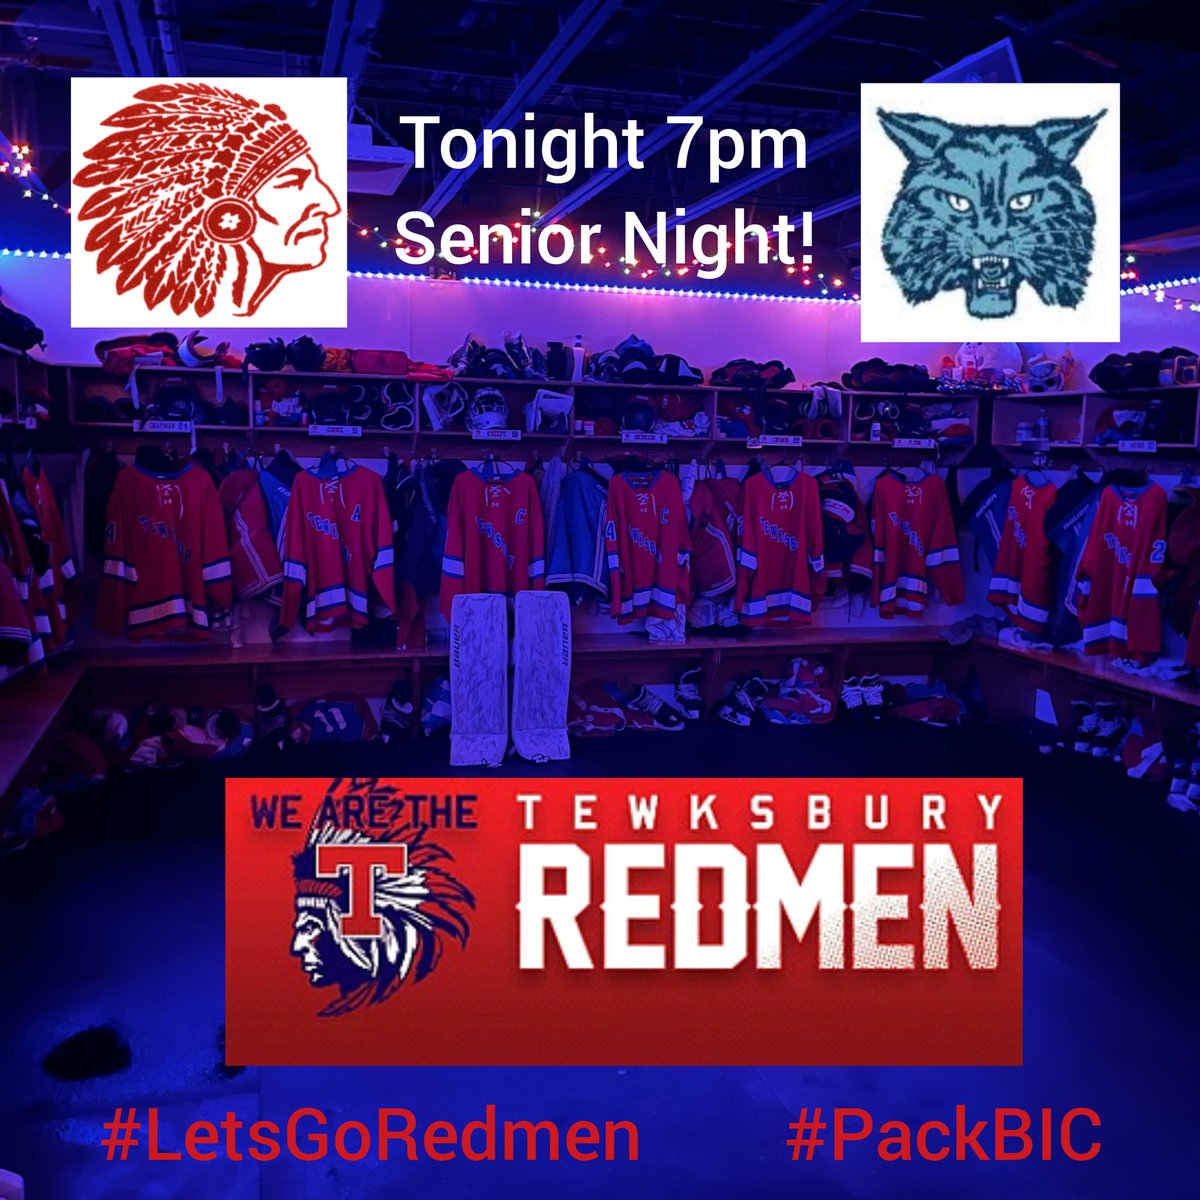 **GAMEDAY** REDMEN v. Wildcats 7pm @ Breakaway!! Does it get any better...YES... add Senior Night!! Come  out and Celebrate our Senior class! Game #20 #RivalryGame #LetsGoRedmen #PackBIC @MassHSHockey @MHLbbiglive @MassNZ @HNIBonline @In_The_Slot